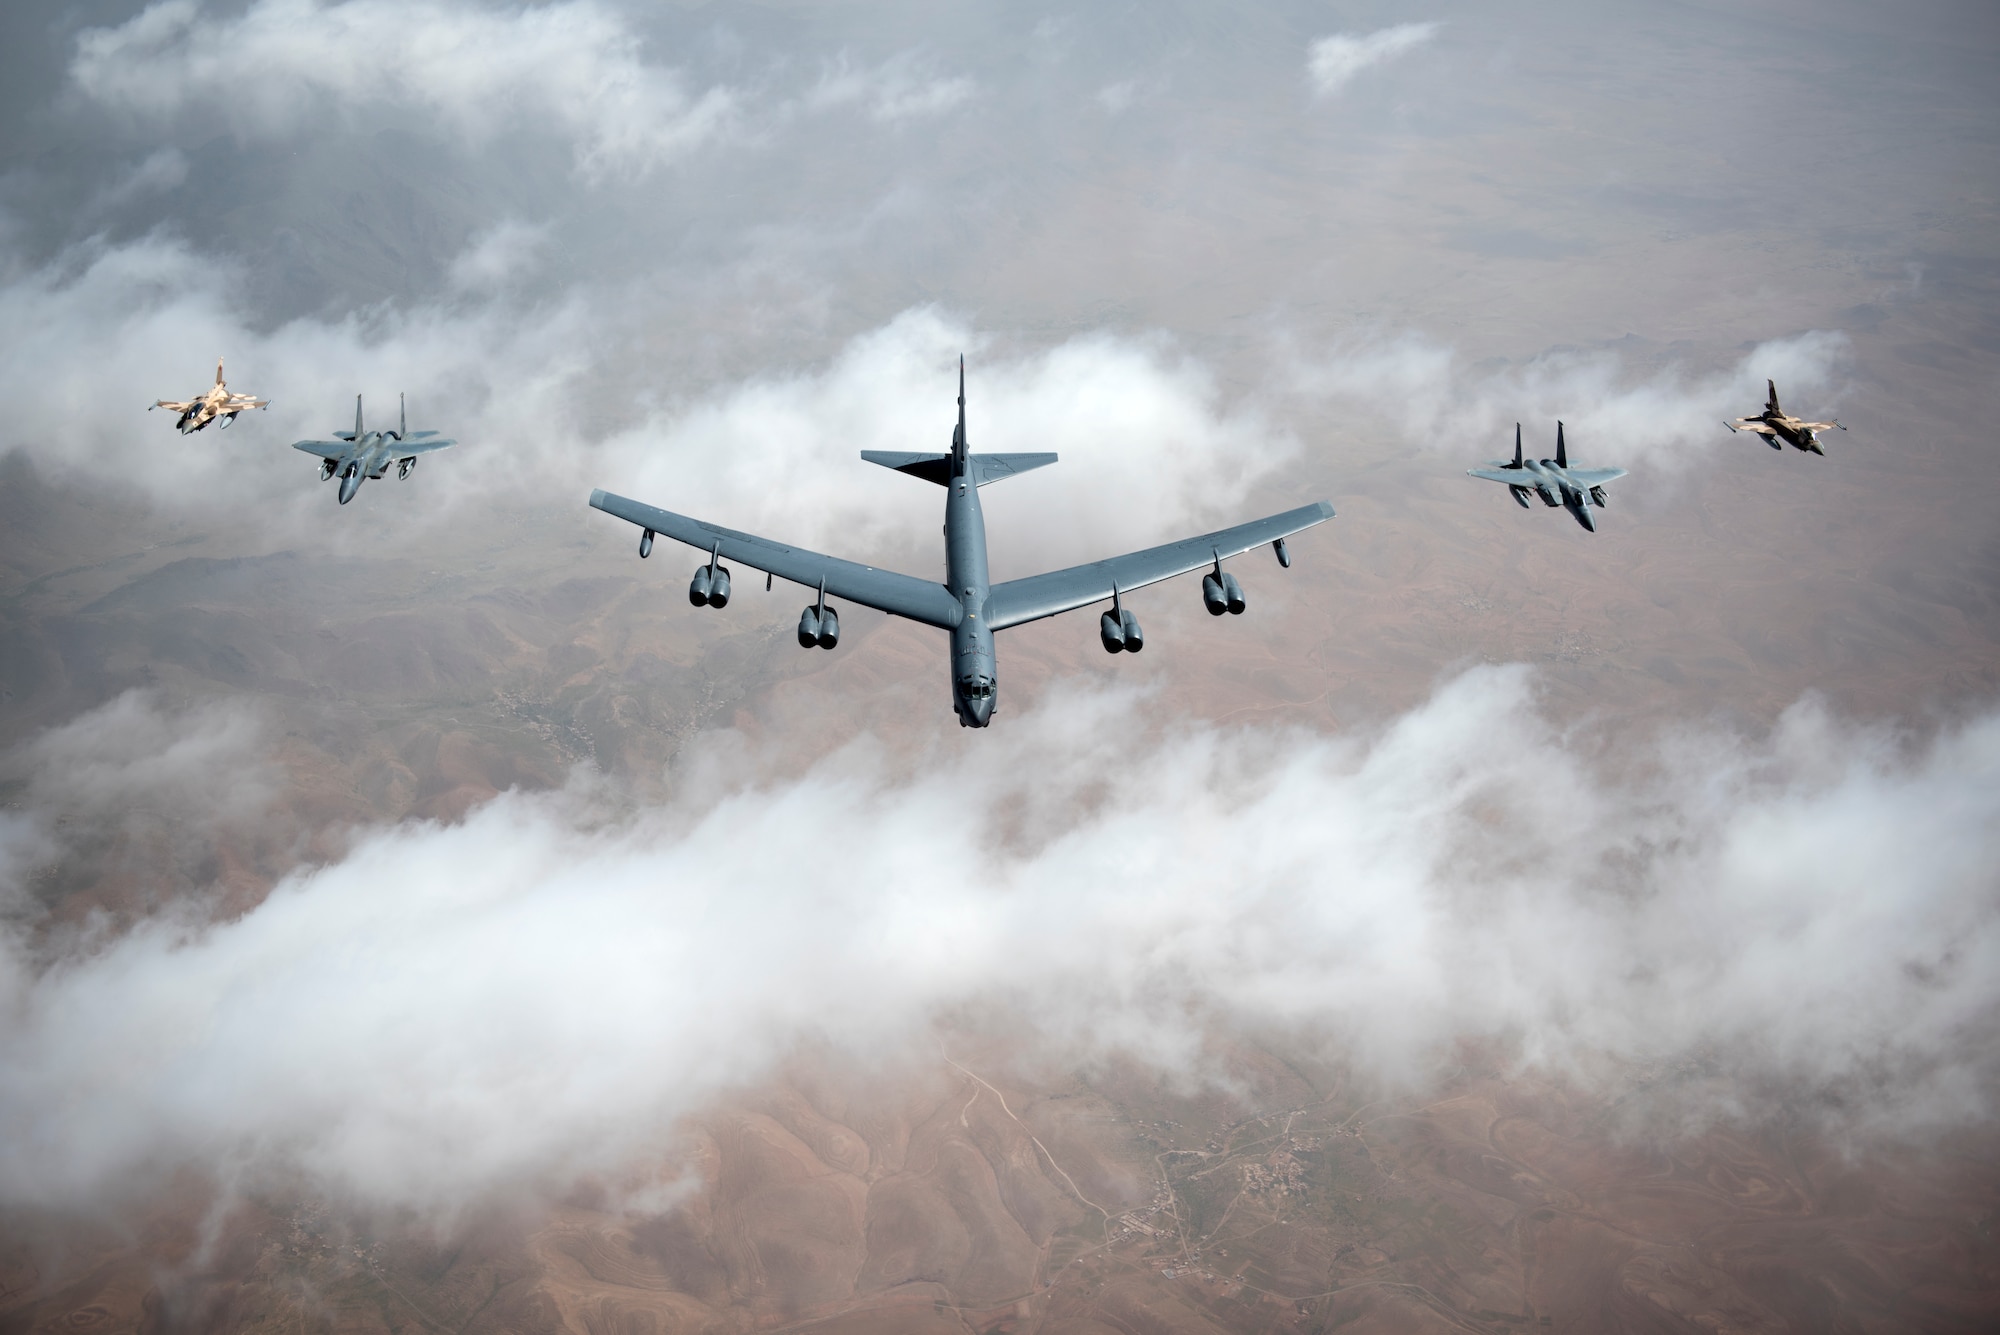 U.S. Air Force F-15Cs, a B-52 Stratofortress bomber and Royal Moroccan air force F-16s fly in a formation during Exercise African Lion April 20, 2018. Various units from the U.S. Armed Forces will conduct multilateral and stability operations training with units from the Royal Moroccan Armed Forces in the Kingdom of Morocco. This combined multilateral exercise is designed to improve interoperability and mutual understanding of each nation’s tactics, techniques and procedures while demonstrating the strong bond between the nation’s militaries. (U.S. Air Force photo/Senior Airman Malcolm Mayfield)